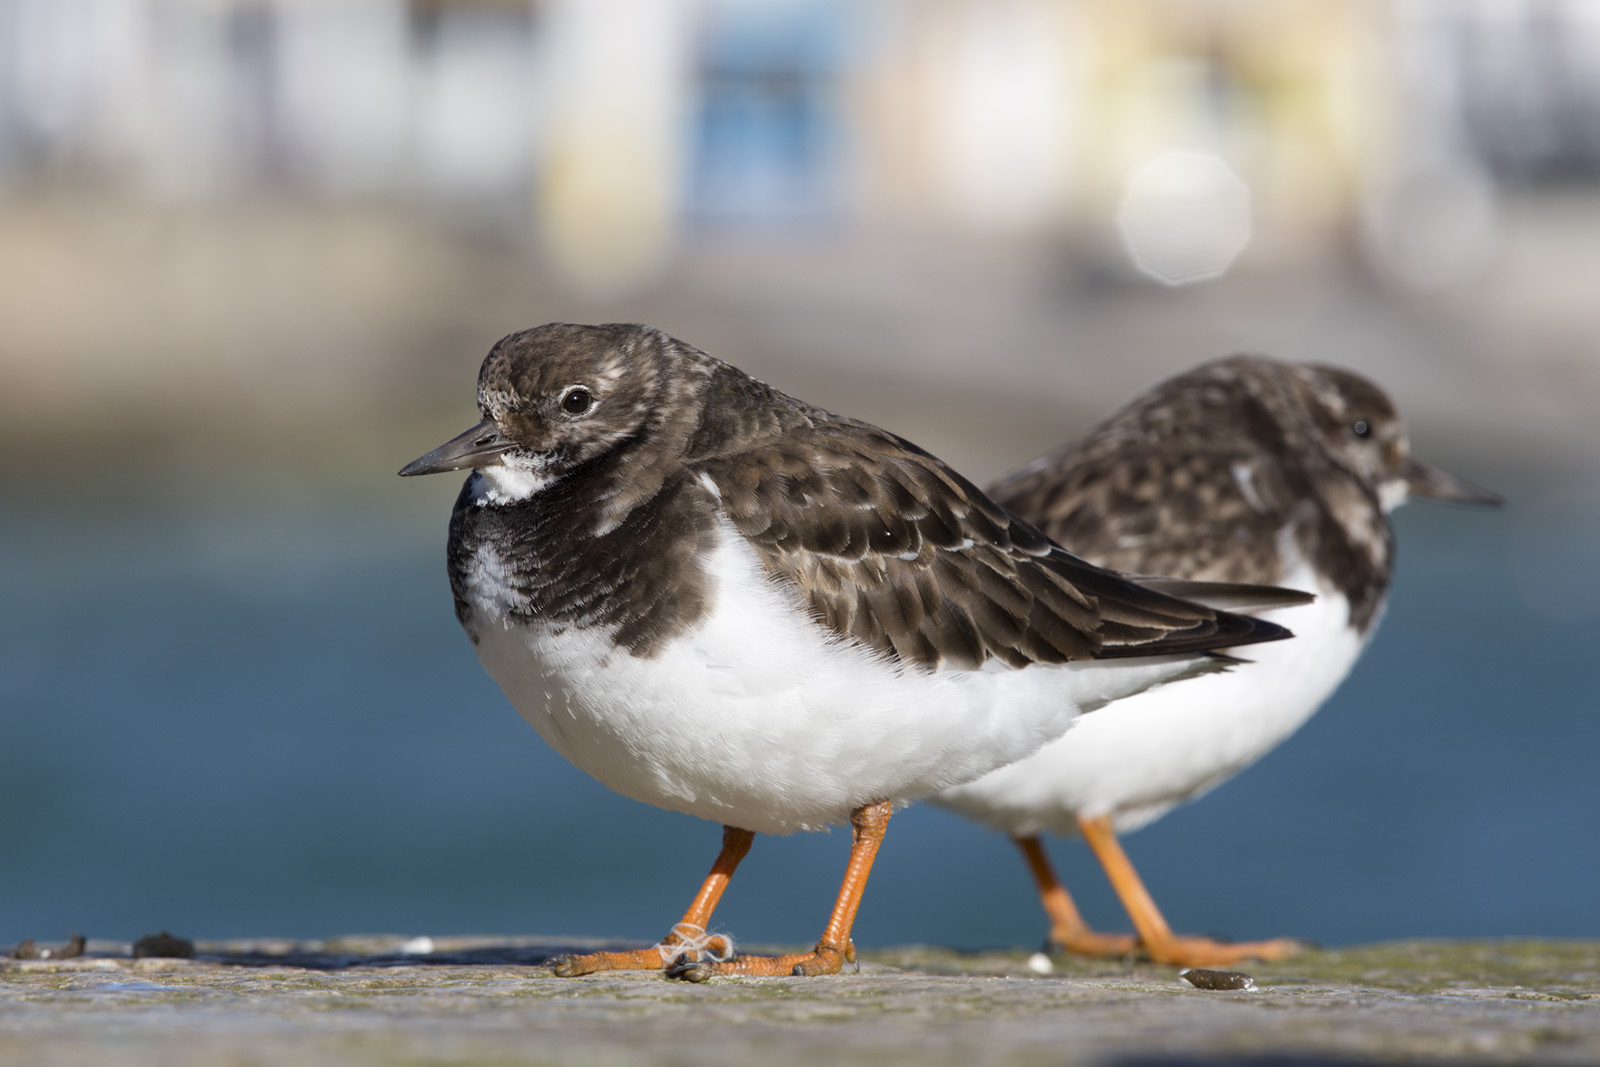 Turnstones are a type of migratory wading bird, many now spend their winter in St Ives. Credit: David Chapman